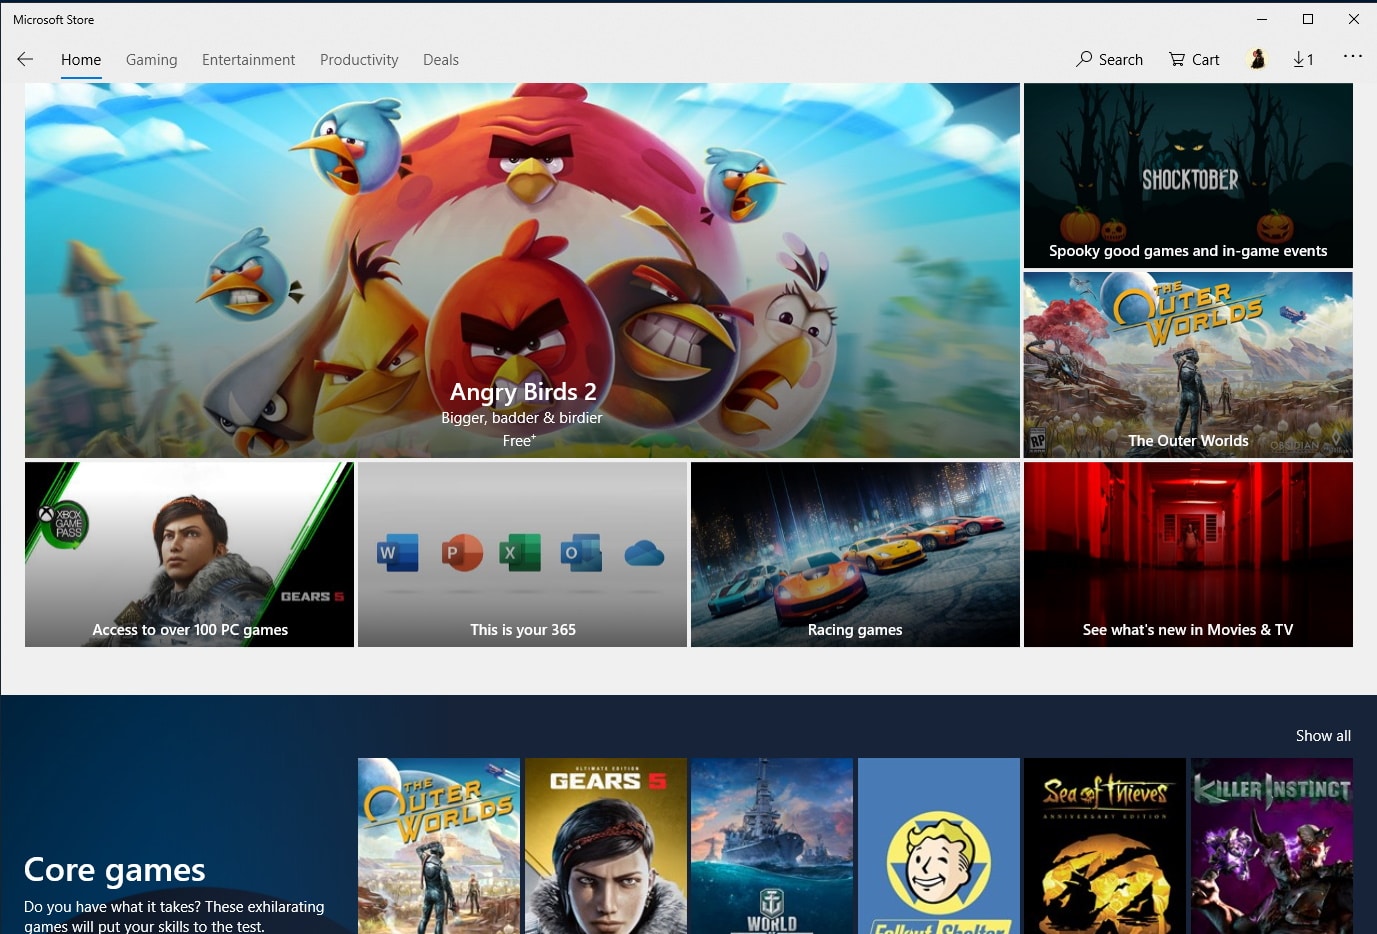 Microsoft may be gearing up to launch its own game store on